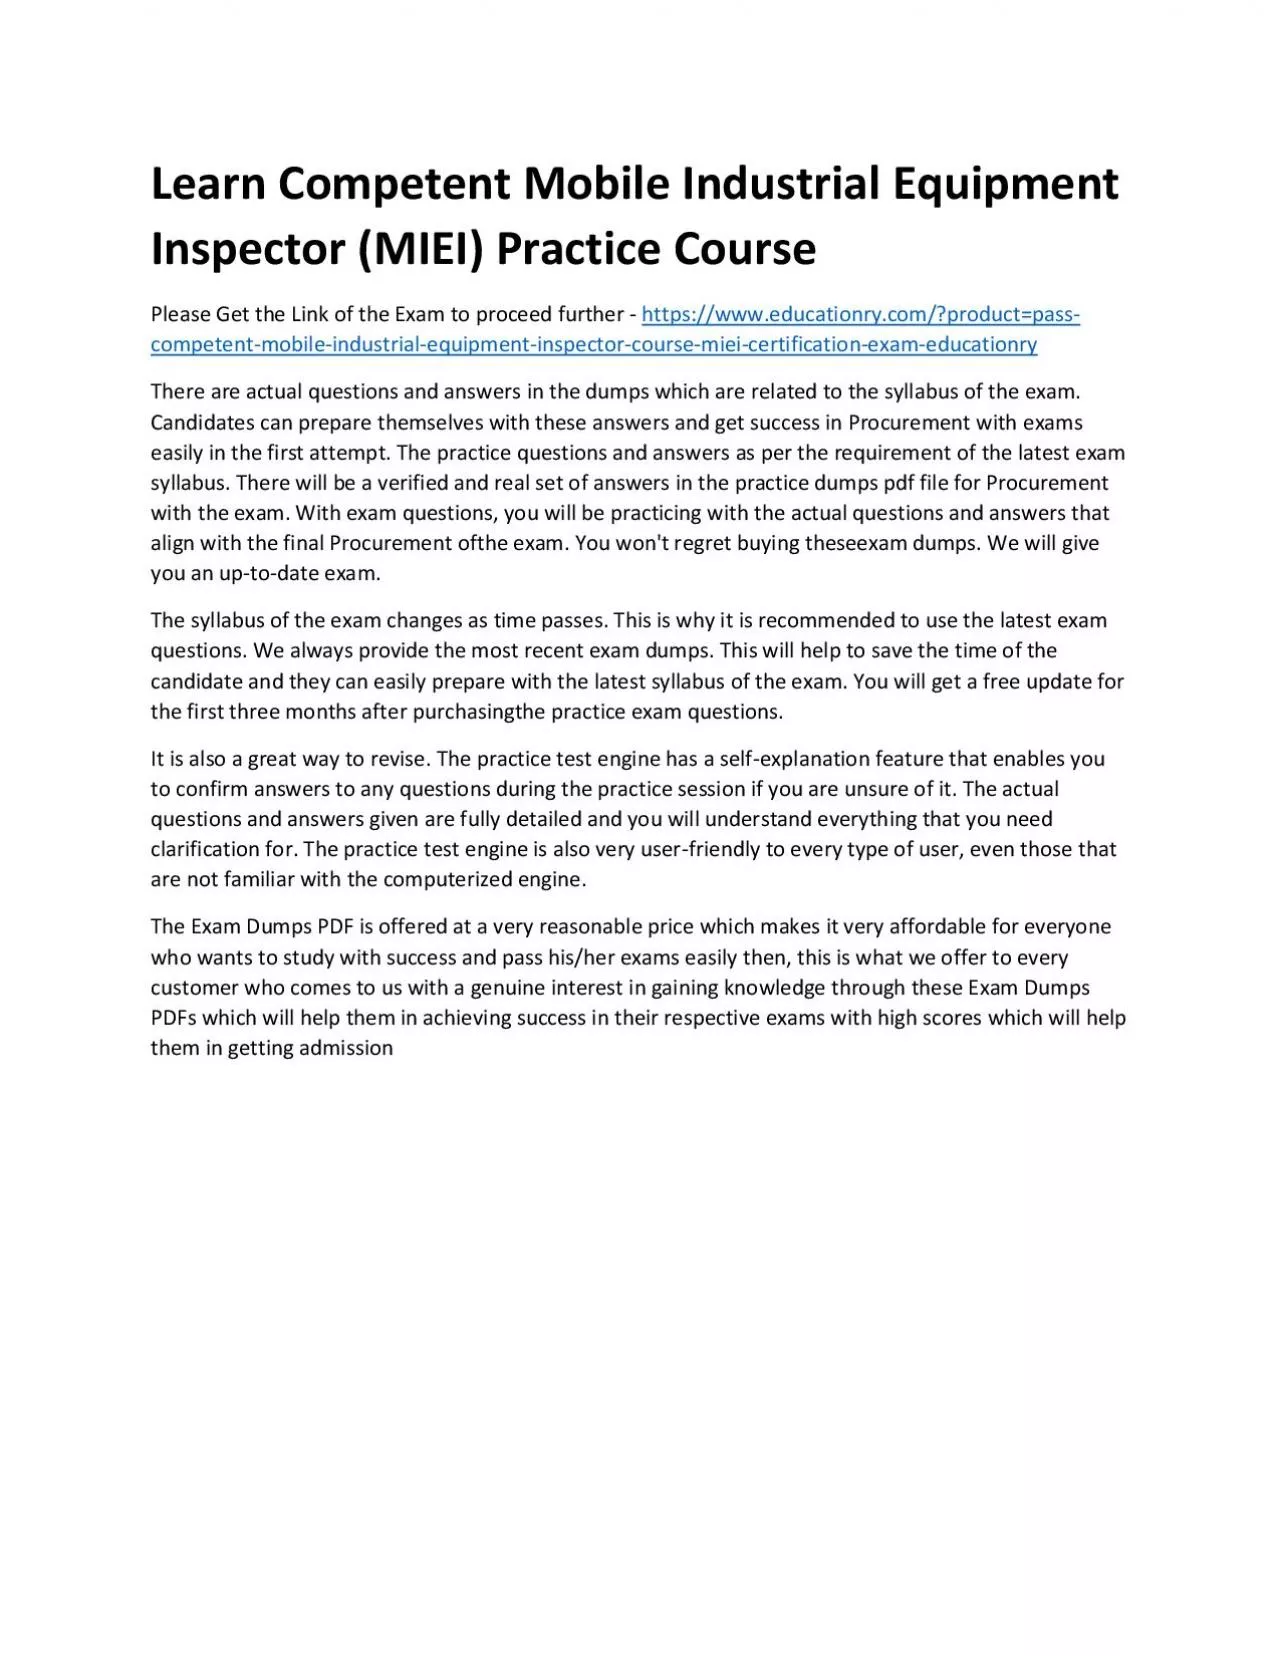 Competent Mobile Industrial Equipment Inspector Course (MIEI)